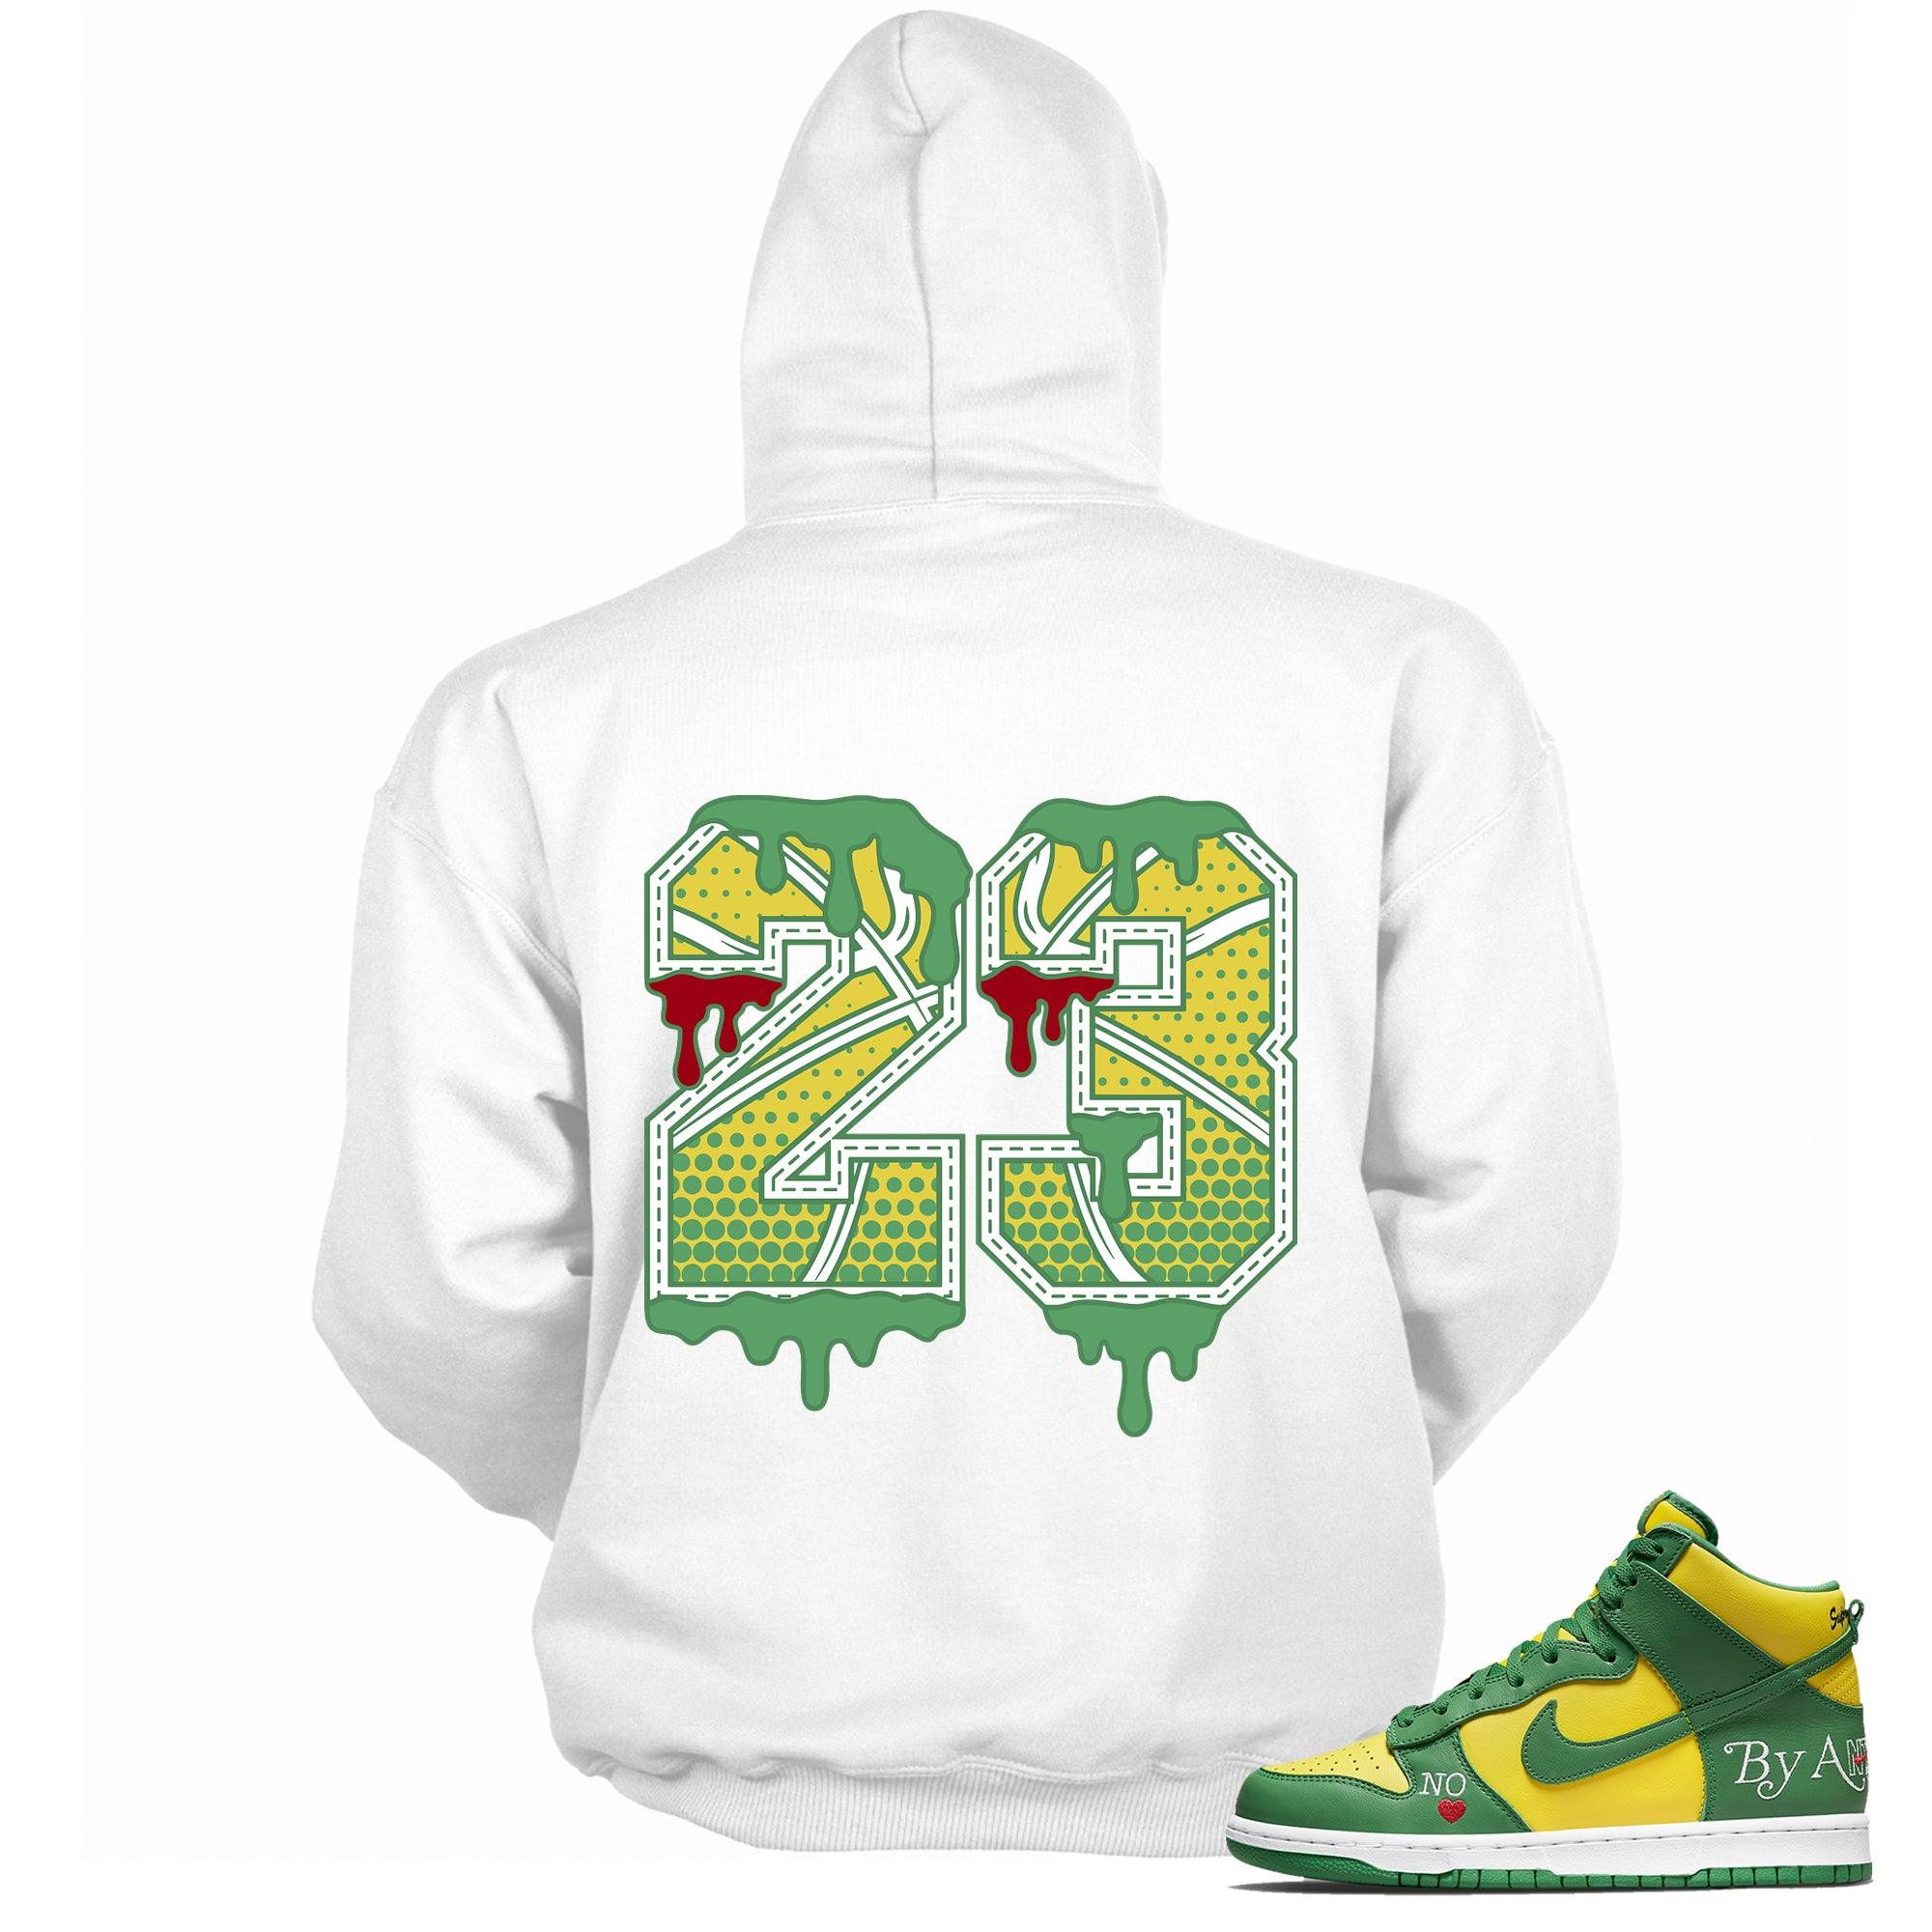 White 23 Drip Hoodie Nike SB Dunk High Supreme By Any Means Brazil photo